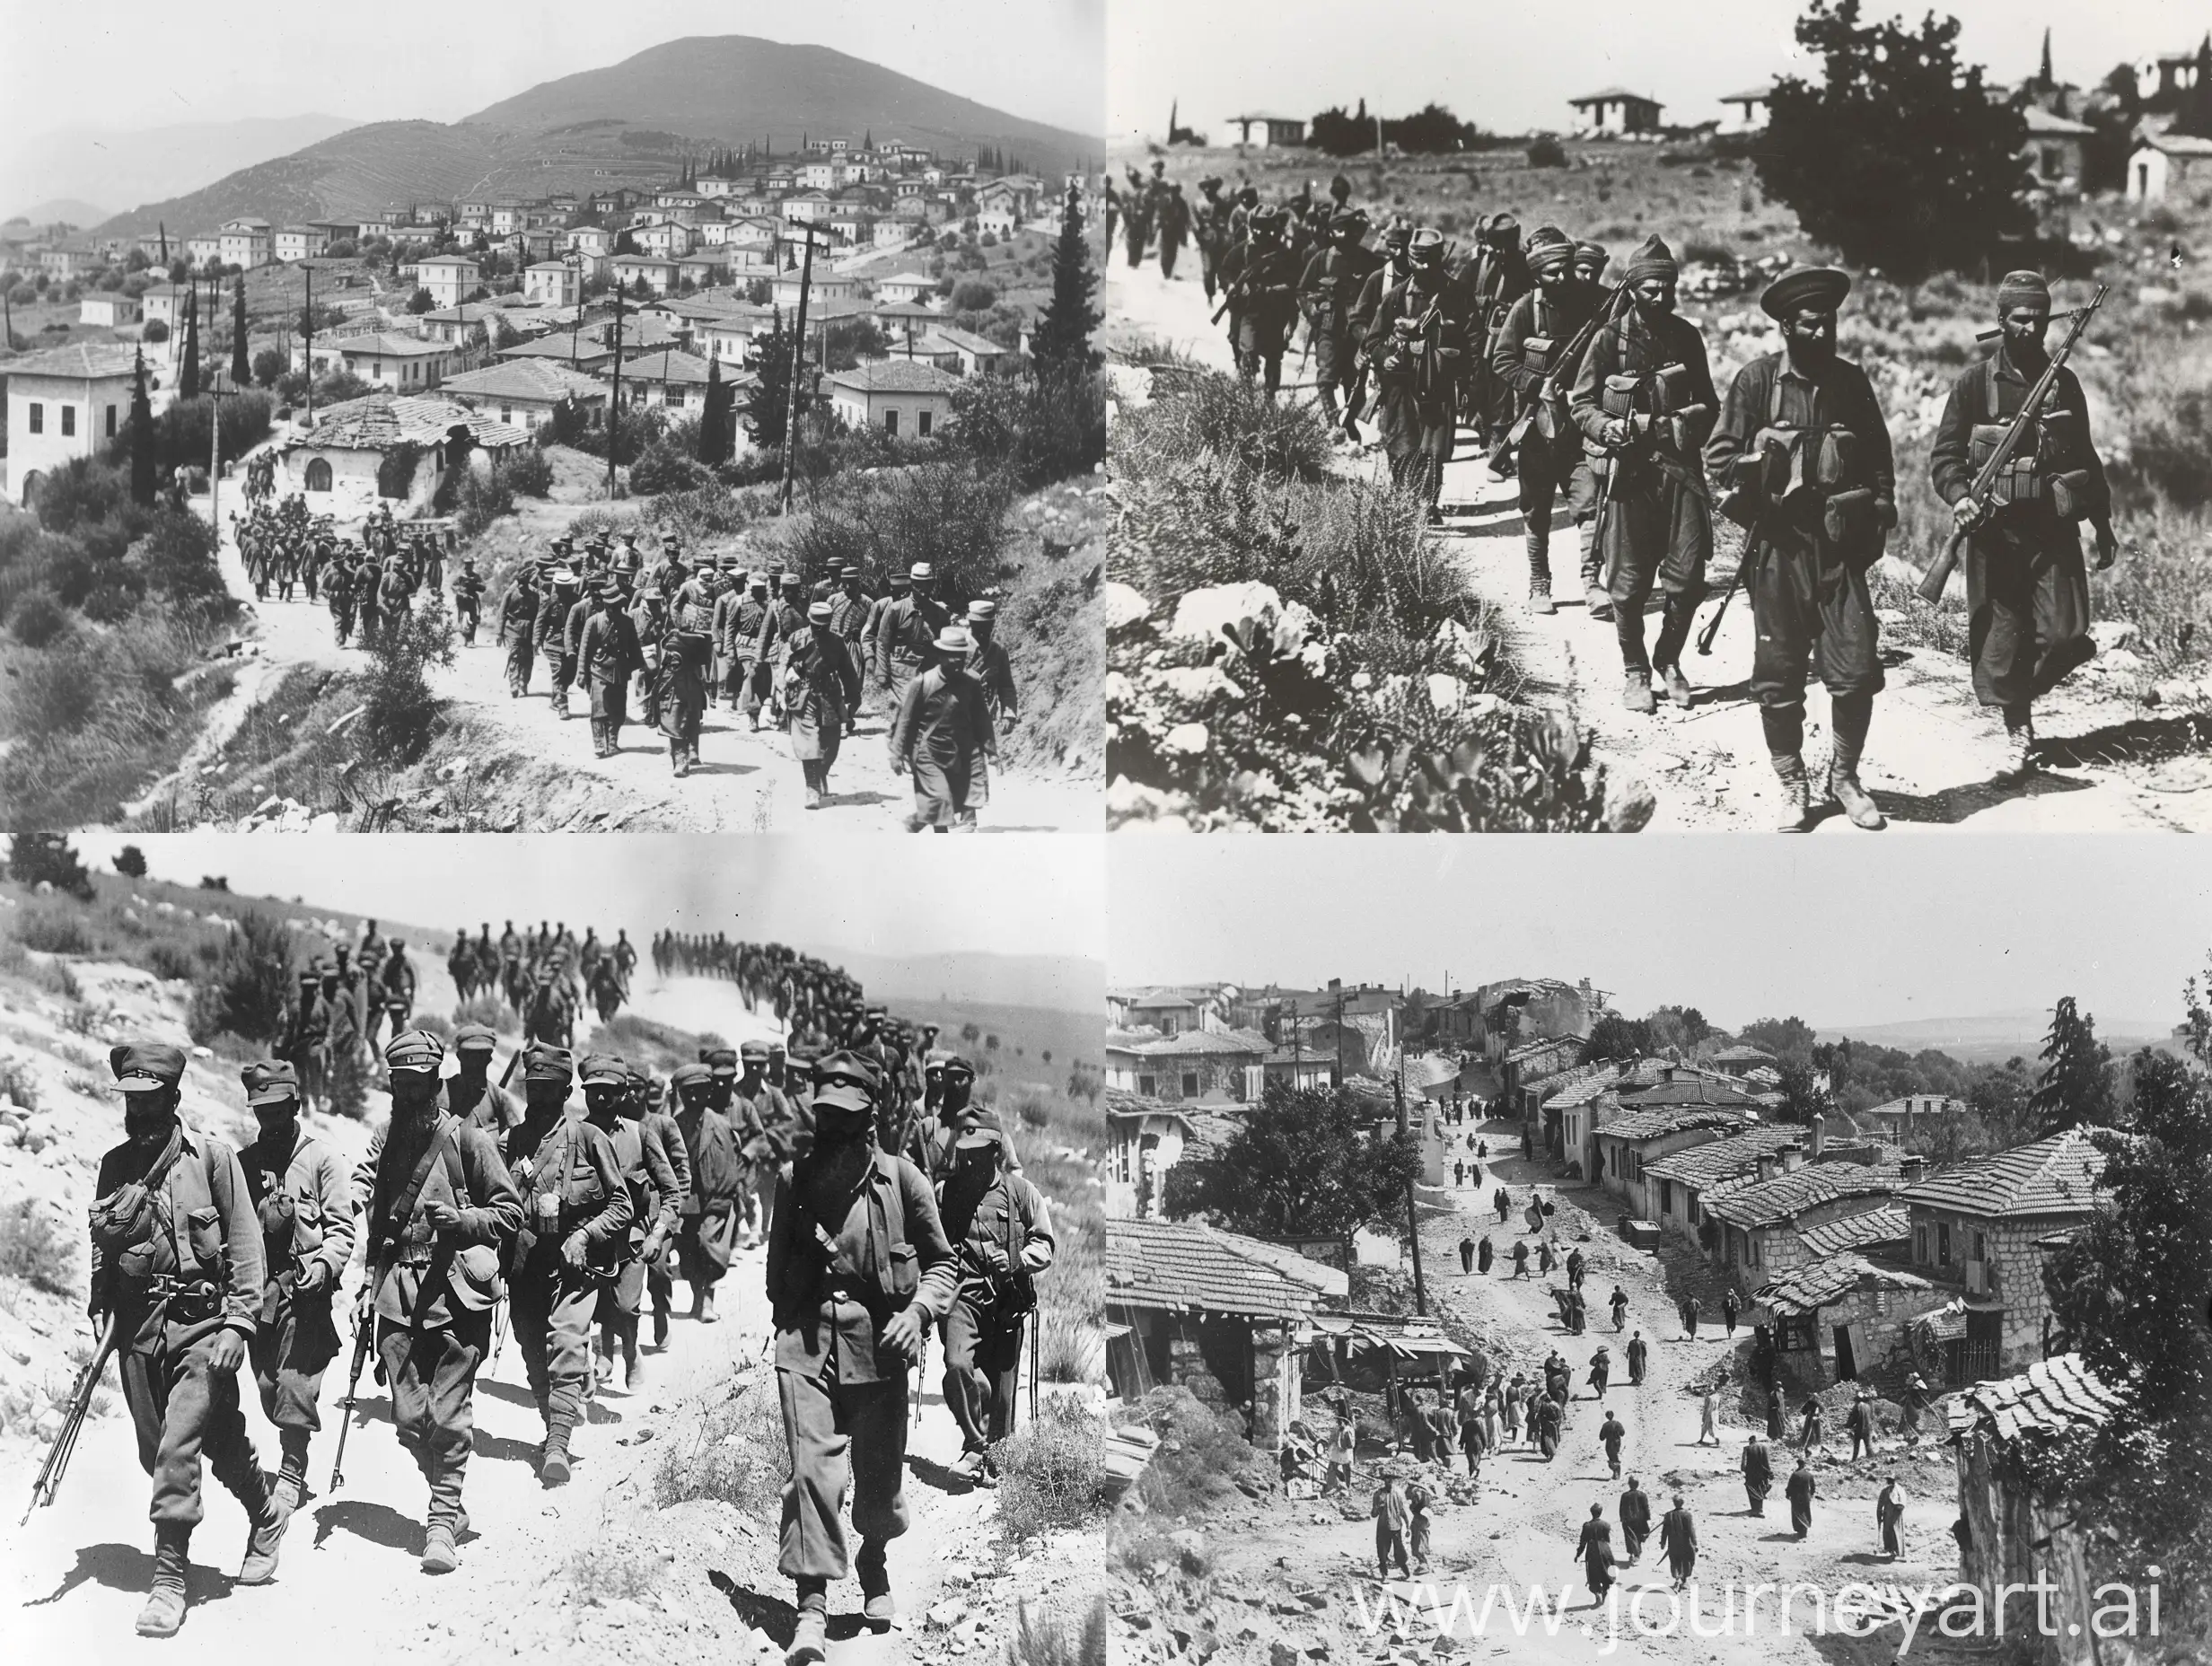 From the summer of 1920, Greek forces controlled a large, predominantly Muslim-populated area where Turkish Kuvay-i Milliye gangs carried out operations against Greek lines of communication and Turkish nationalist groups engaged in espionage activities. Following the failure of the Greek troops, revenge attacks were launched against Turkish villages on suspicion of anti-Greek activities and secret arms depots were searched. Ottoman documents reveal that local Turkish villages had previously been disarmed, making them easy targets for looting by local Greek and Armenian gangs.